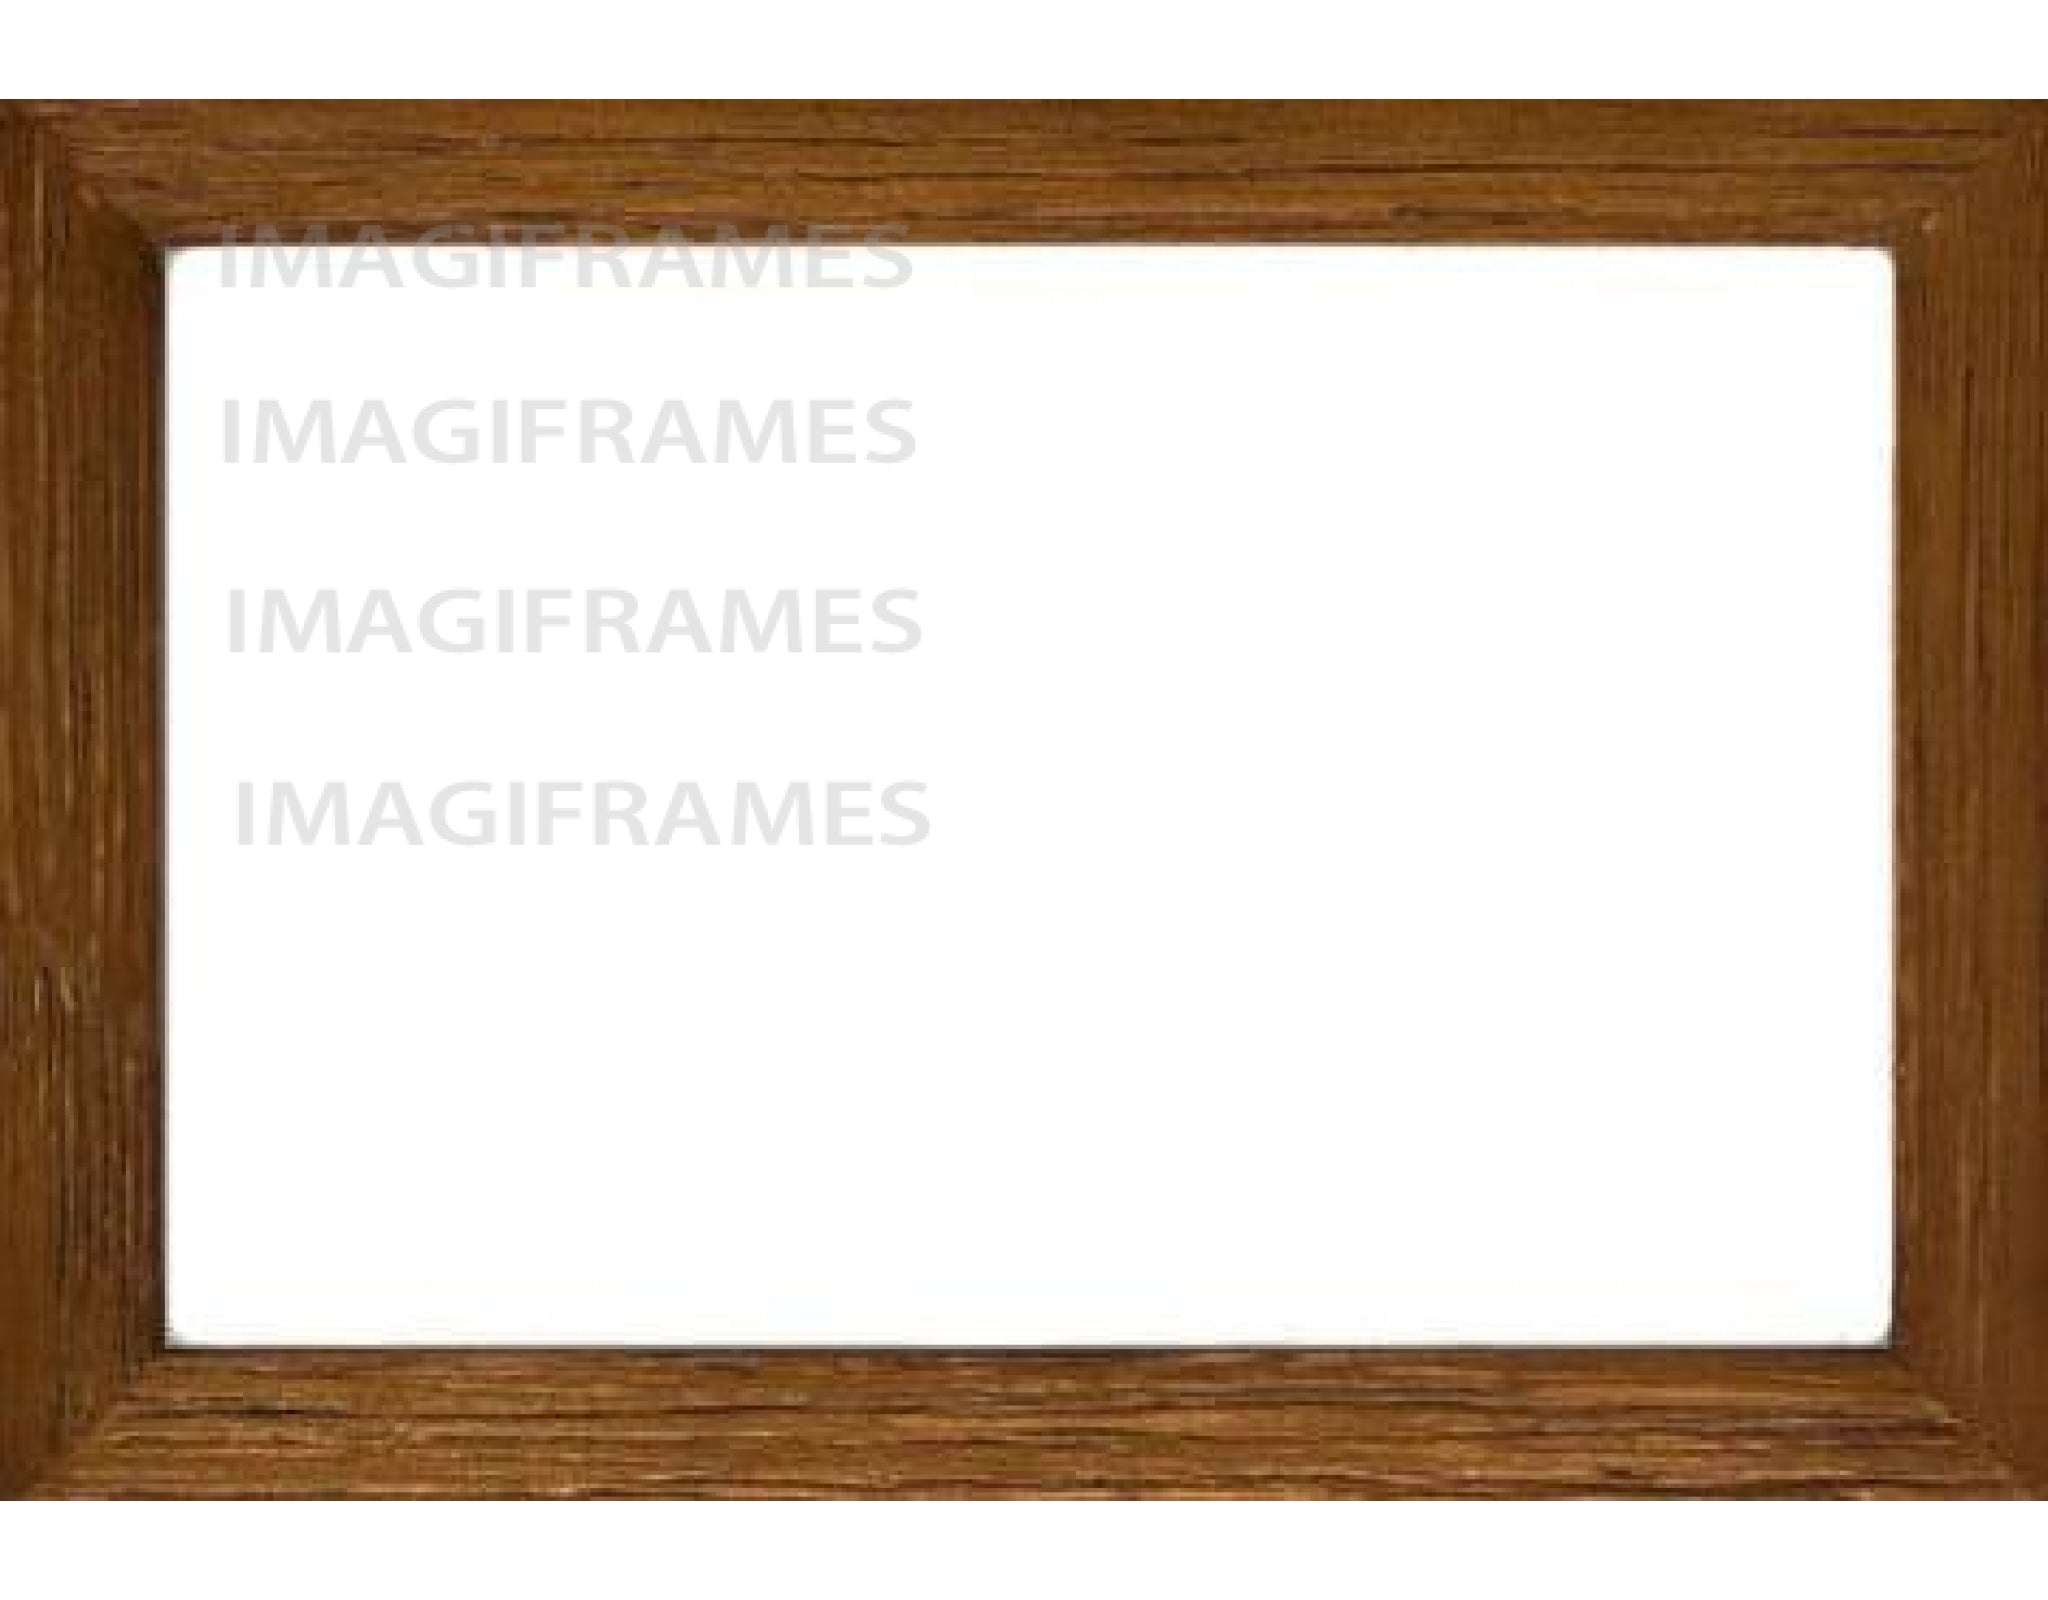 Blank - You Design It 4X6 Brown Frame (4X6)